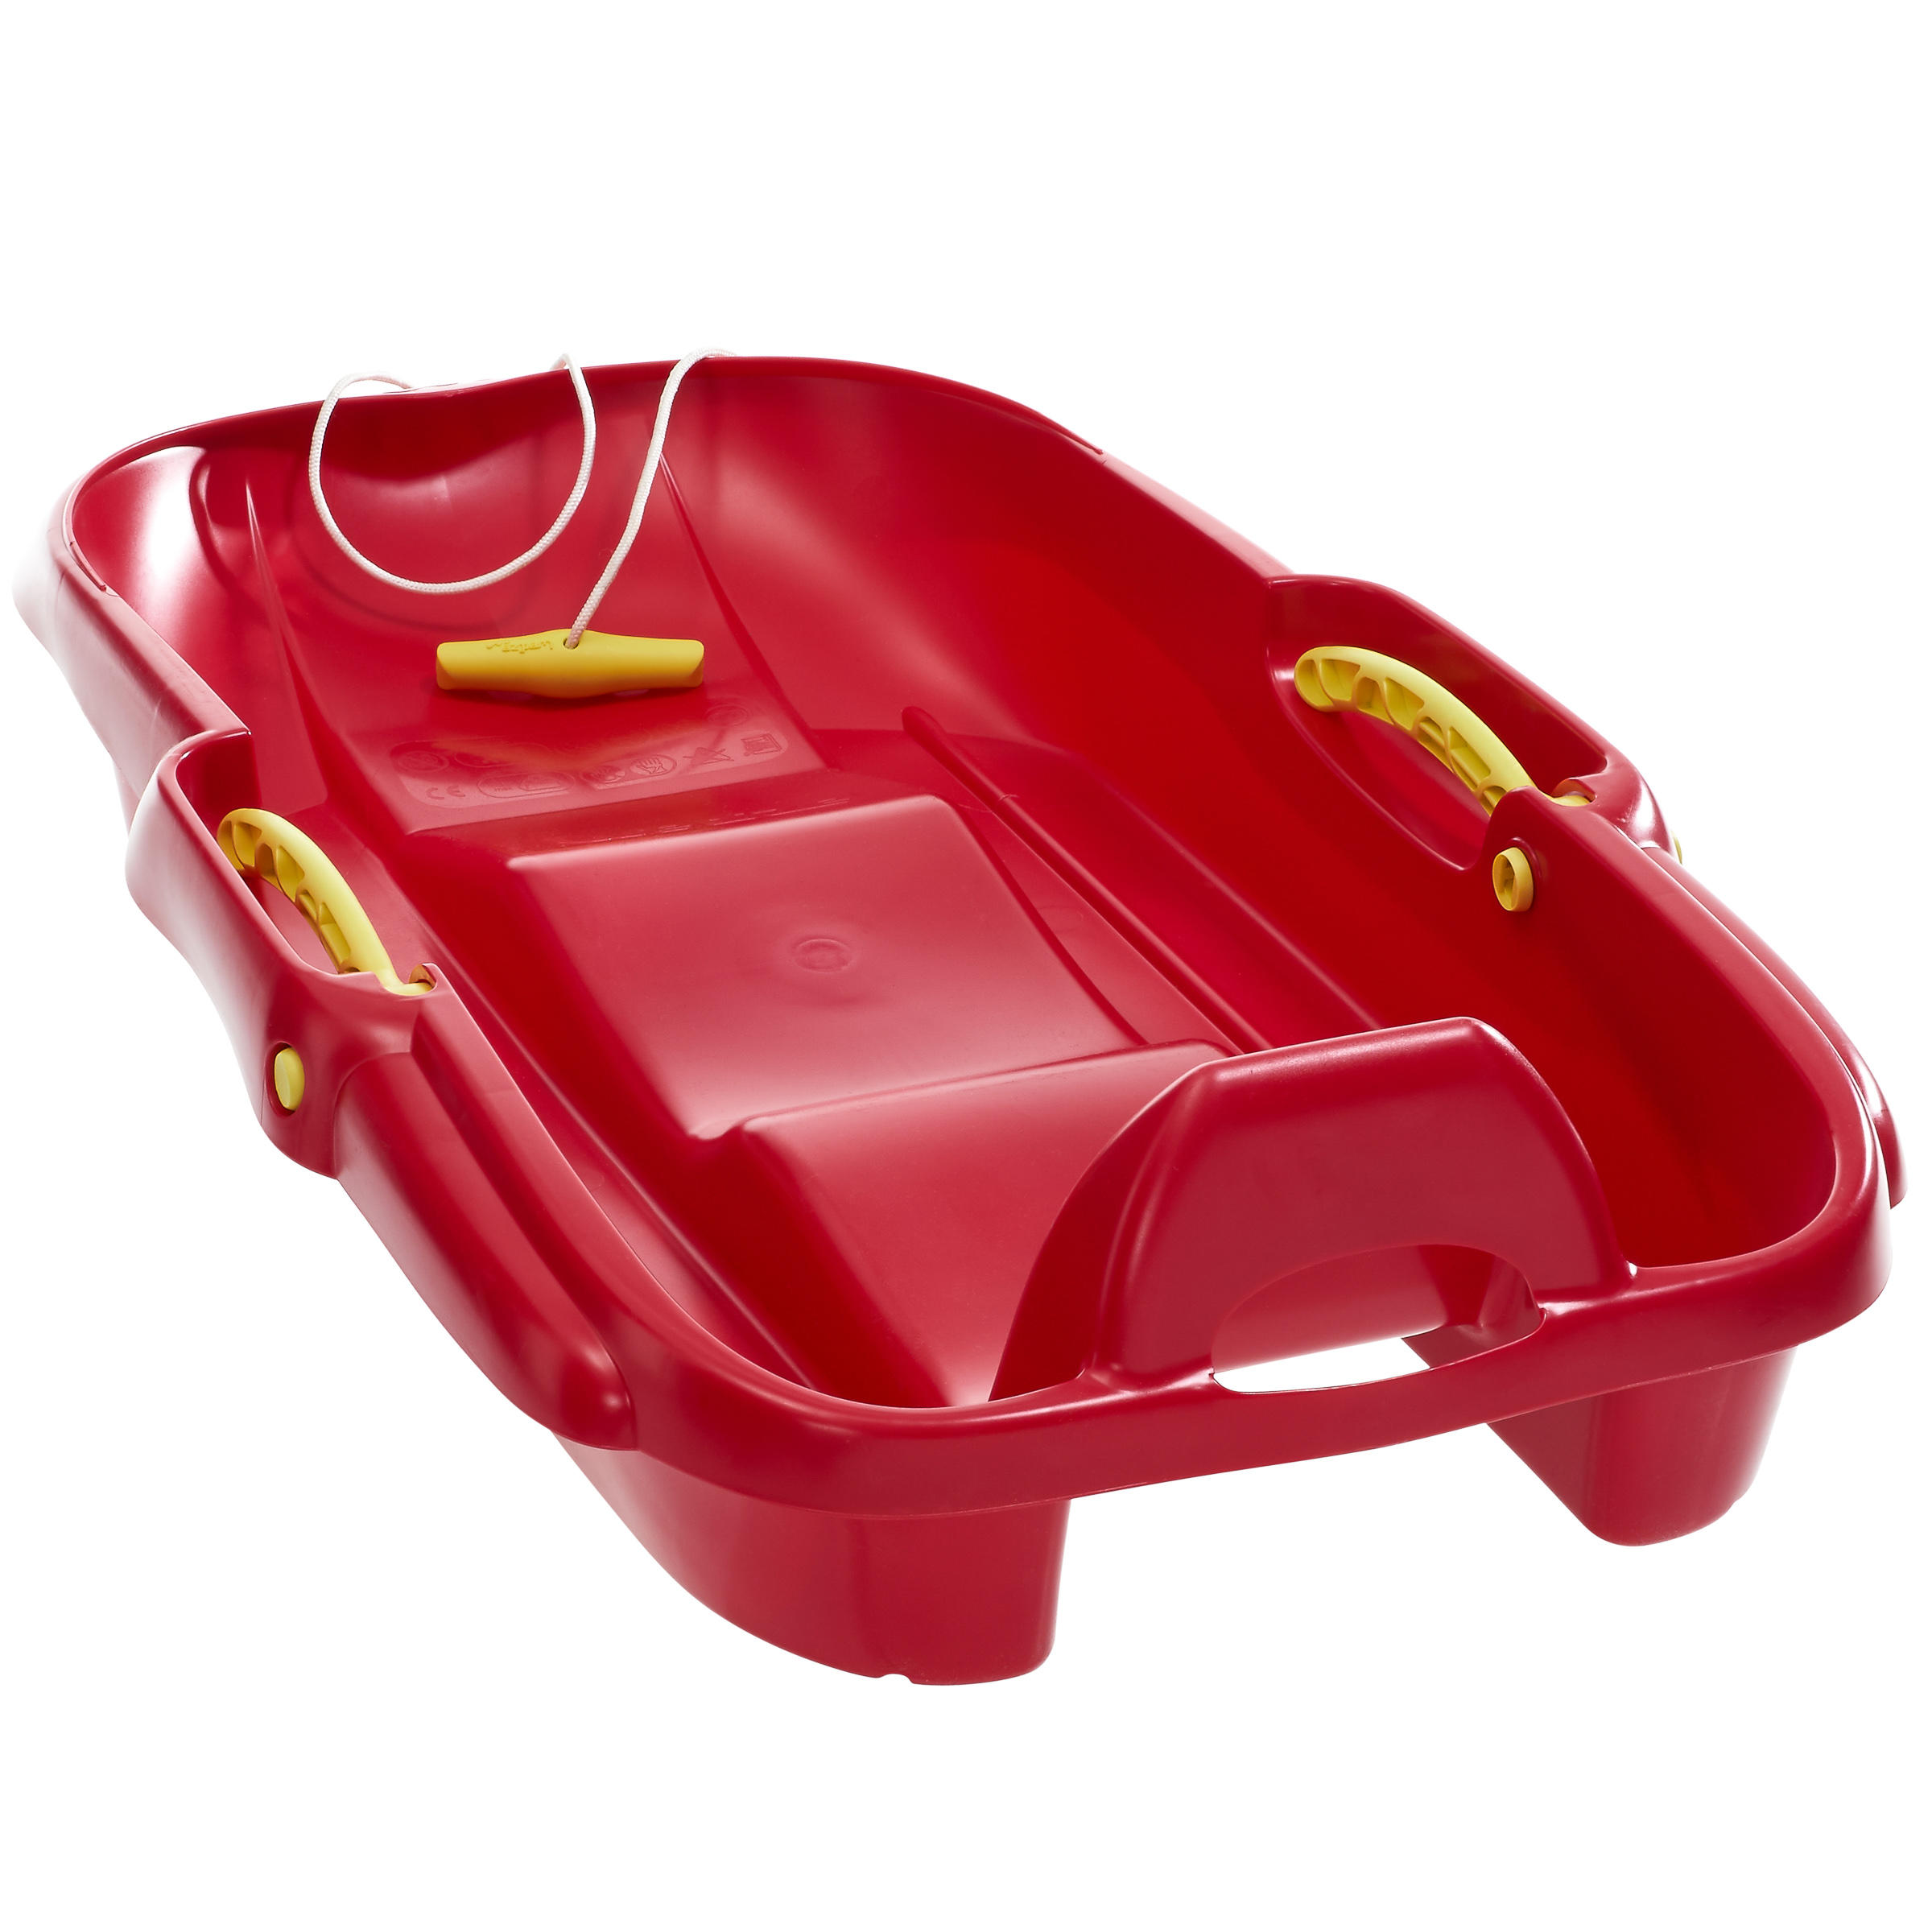 MRZ 100 2-Person Sledge With Brake - Red 3/8